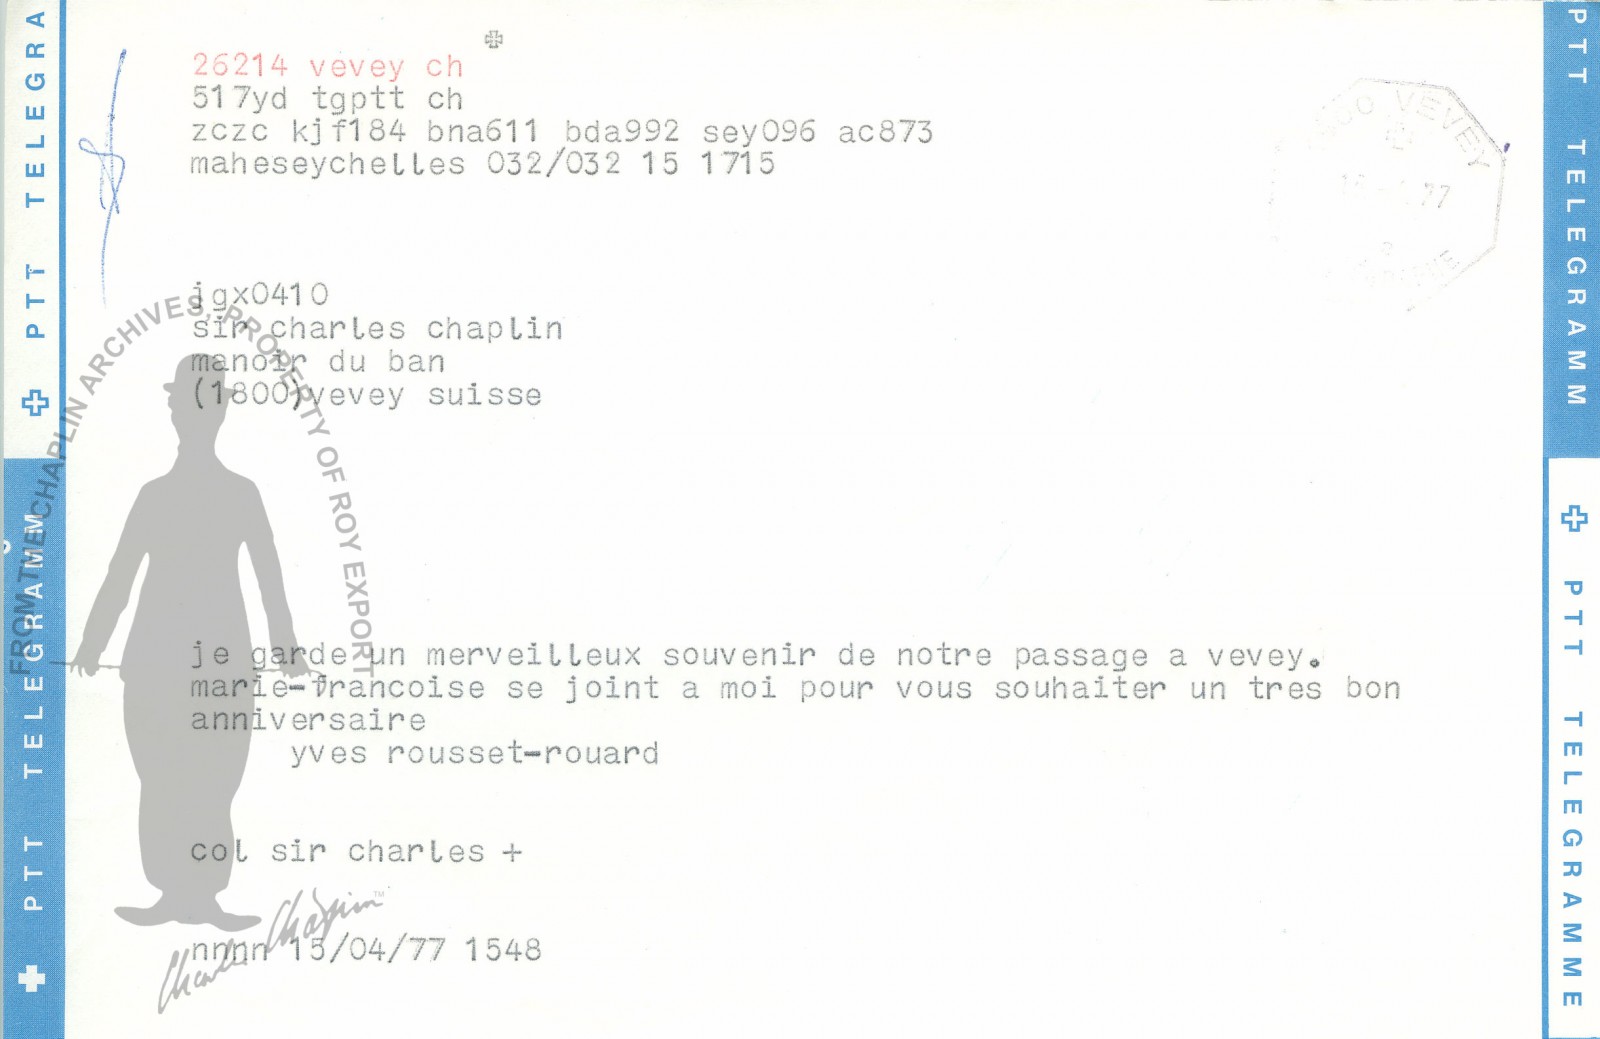 Search Search Telegram April 1977 Mahe Seychelles To Charles Chaplin Yves Rousset Rouard Charlie Chaplin Archive